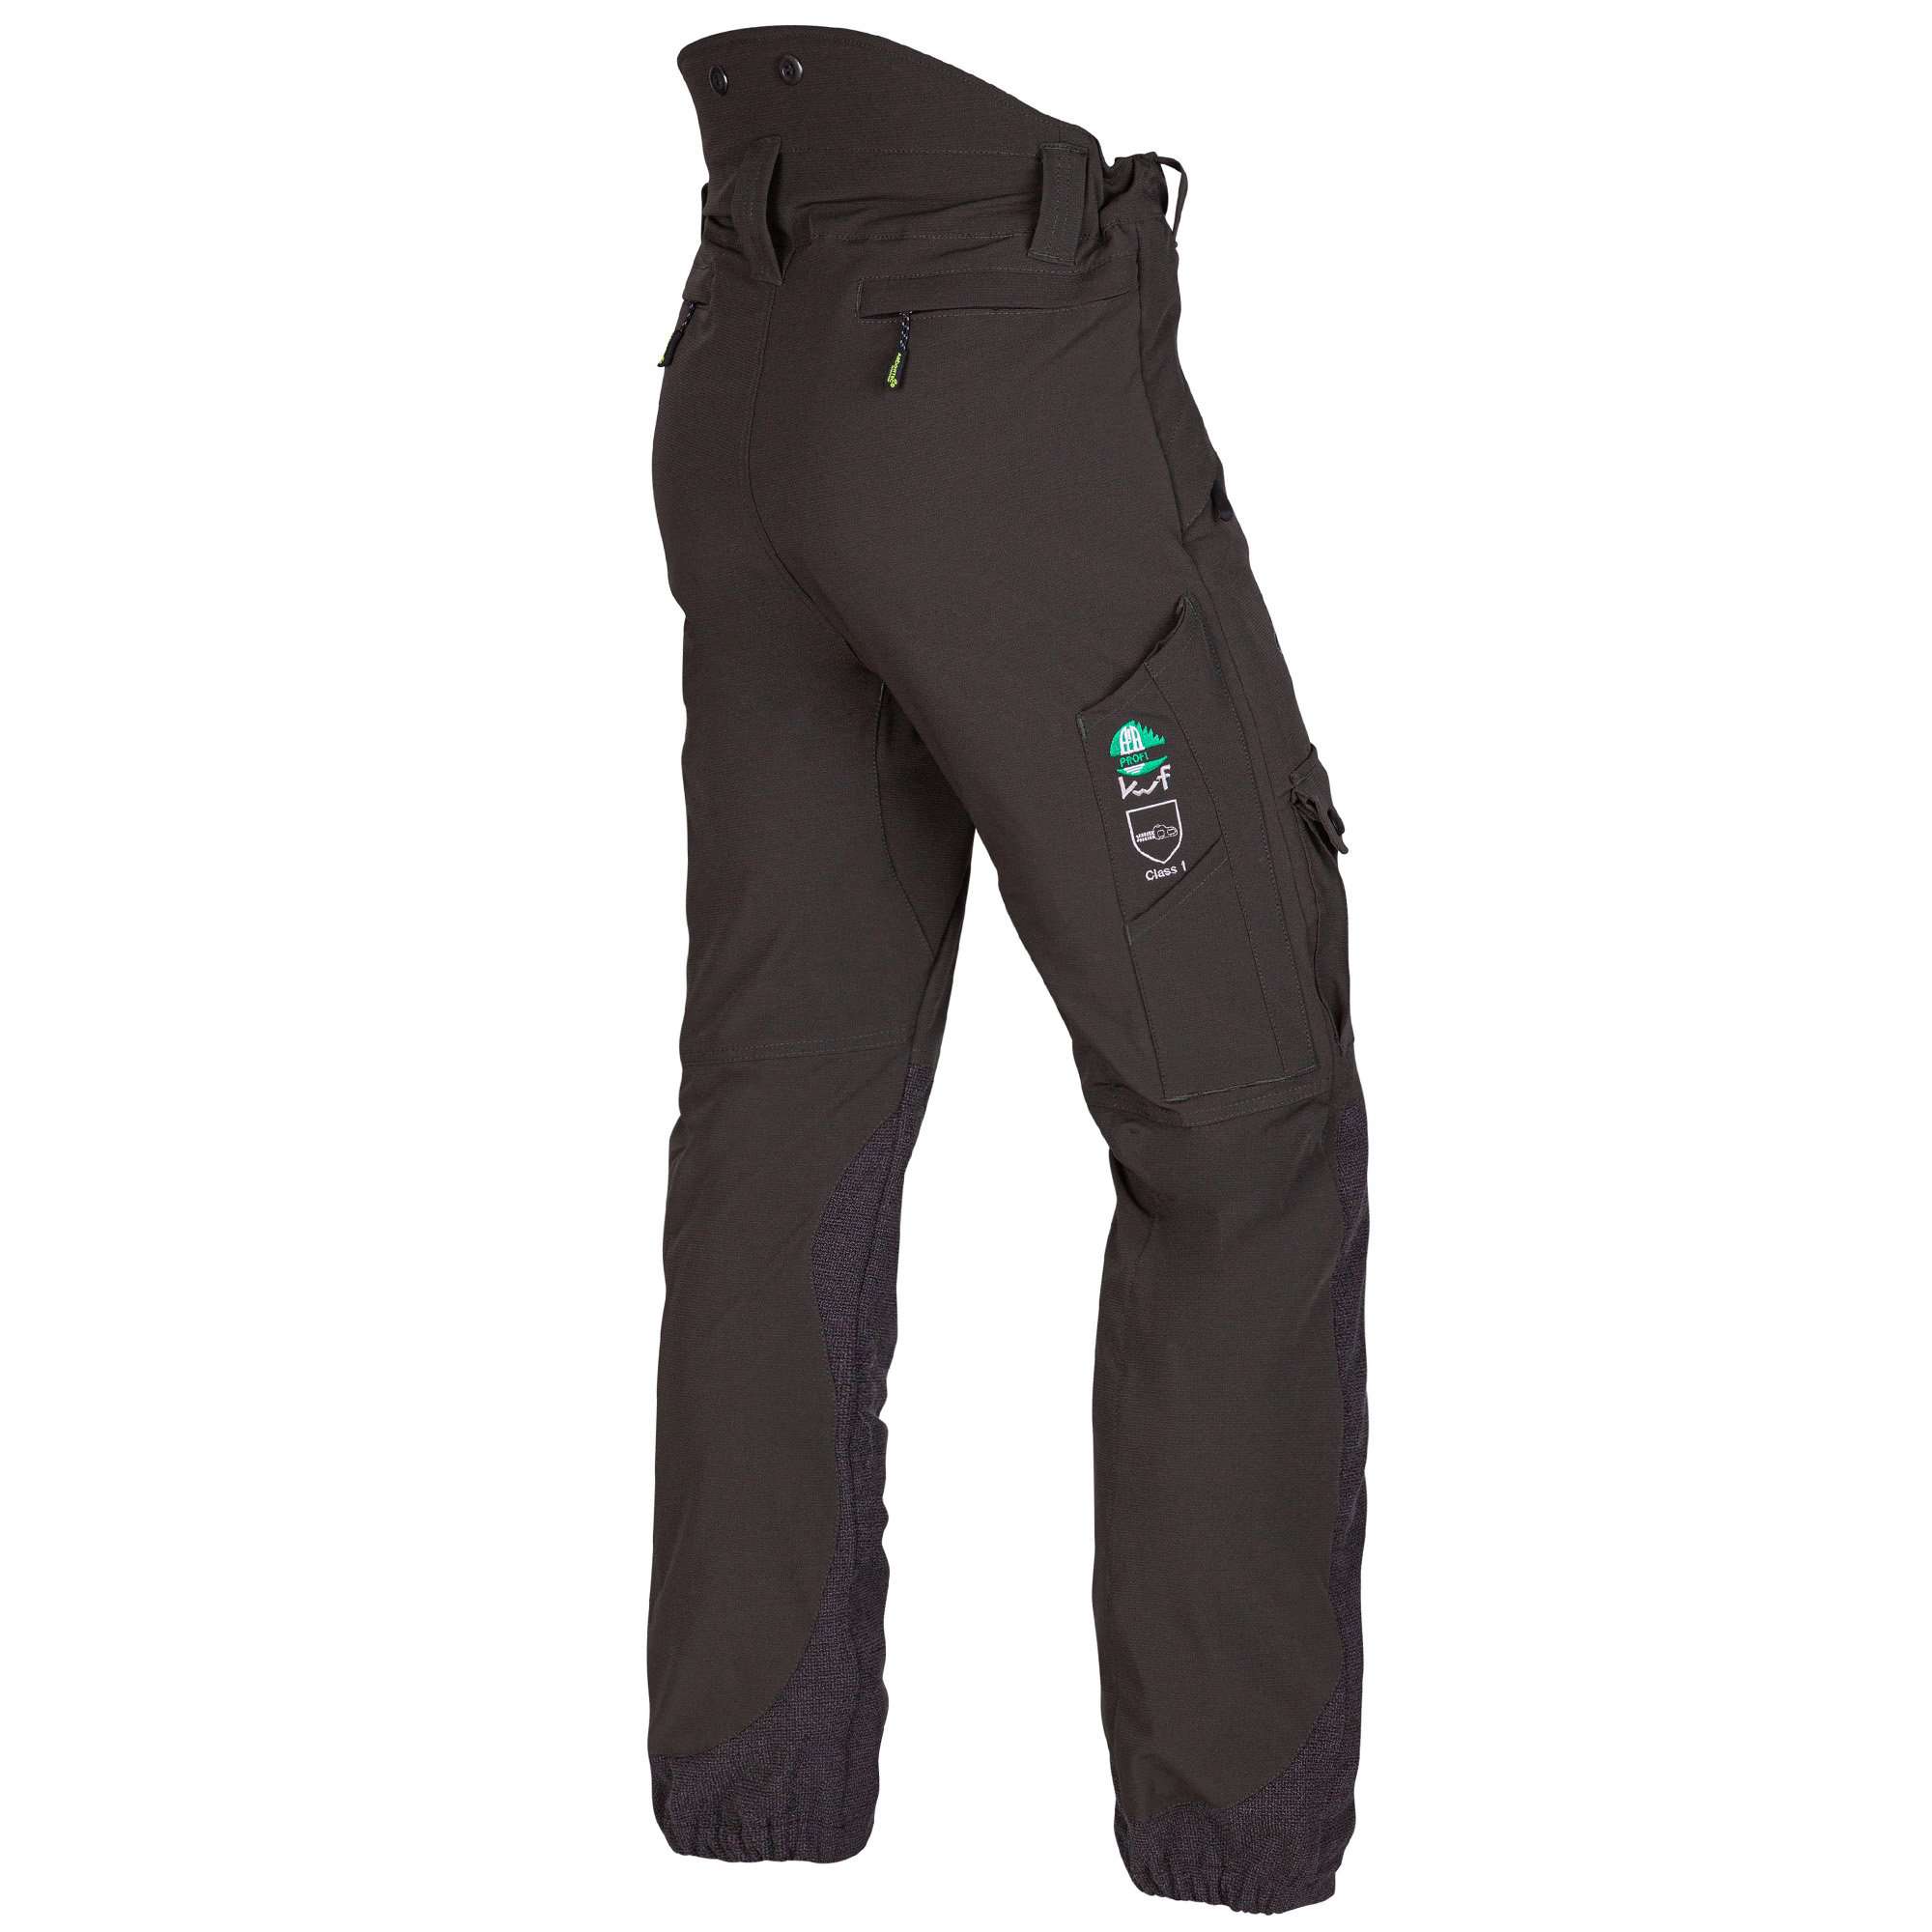 AT4010 Breatheflex Type A Class 1 Chainsaw Trousers - Olive - Arbortec Forestwear